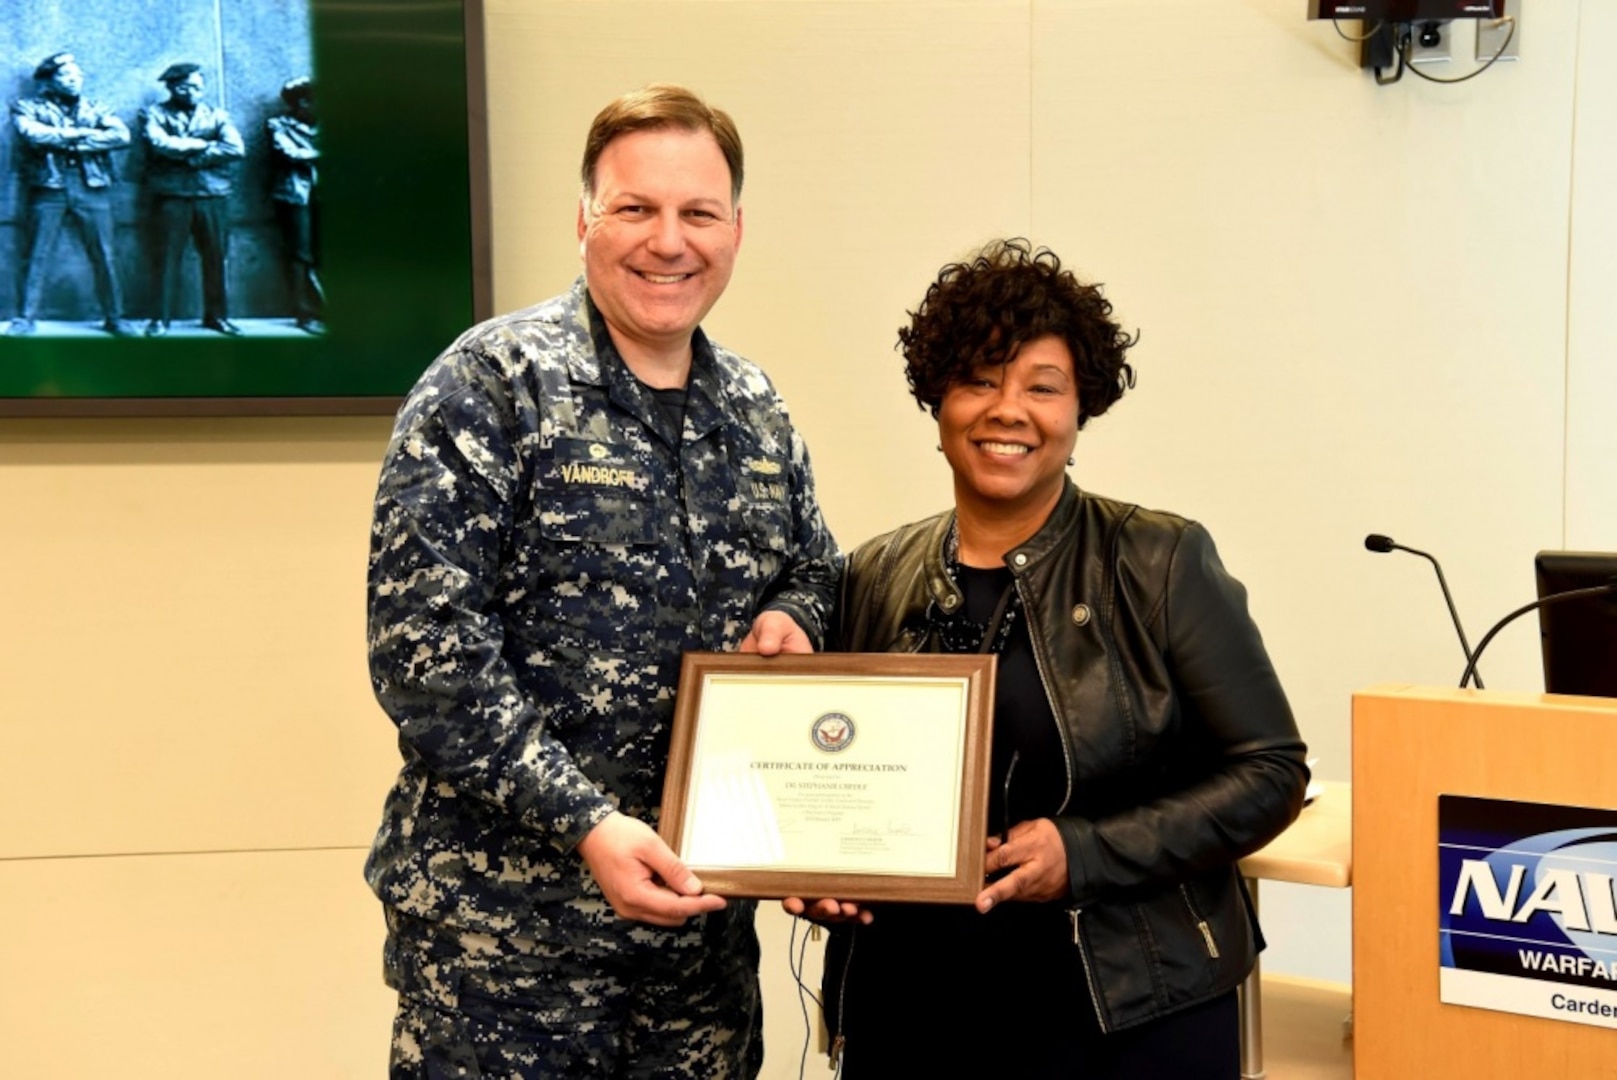 Naval Surface Warfare Center, Carderock Division Commanding Officer Capt. Mark Vandroff presents Dr. Stephanie Hampton Credle a certificate of appreciation at the Black History Month and Dr. Martin Luther King Jr. Day observance event at Carderock™s headquarters in West Bethesda, Md., on Feb. 26, 2019. (U.S. Navy photo by Harry Friedman/Released)